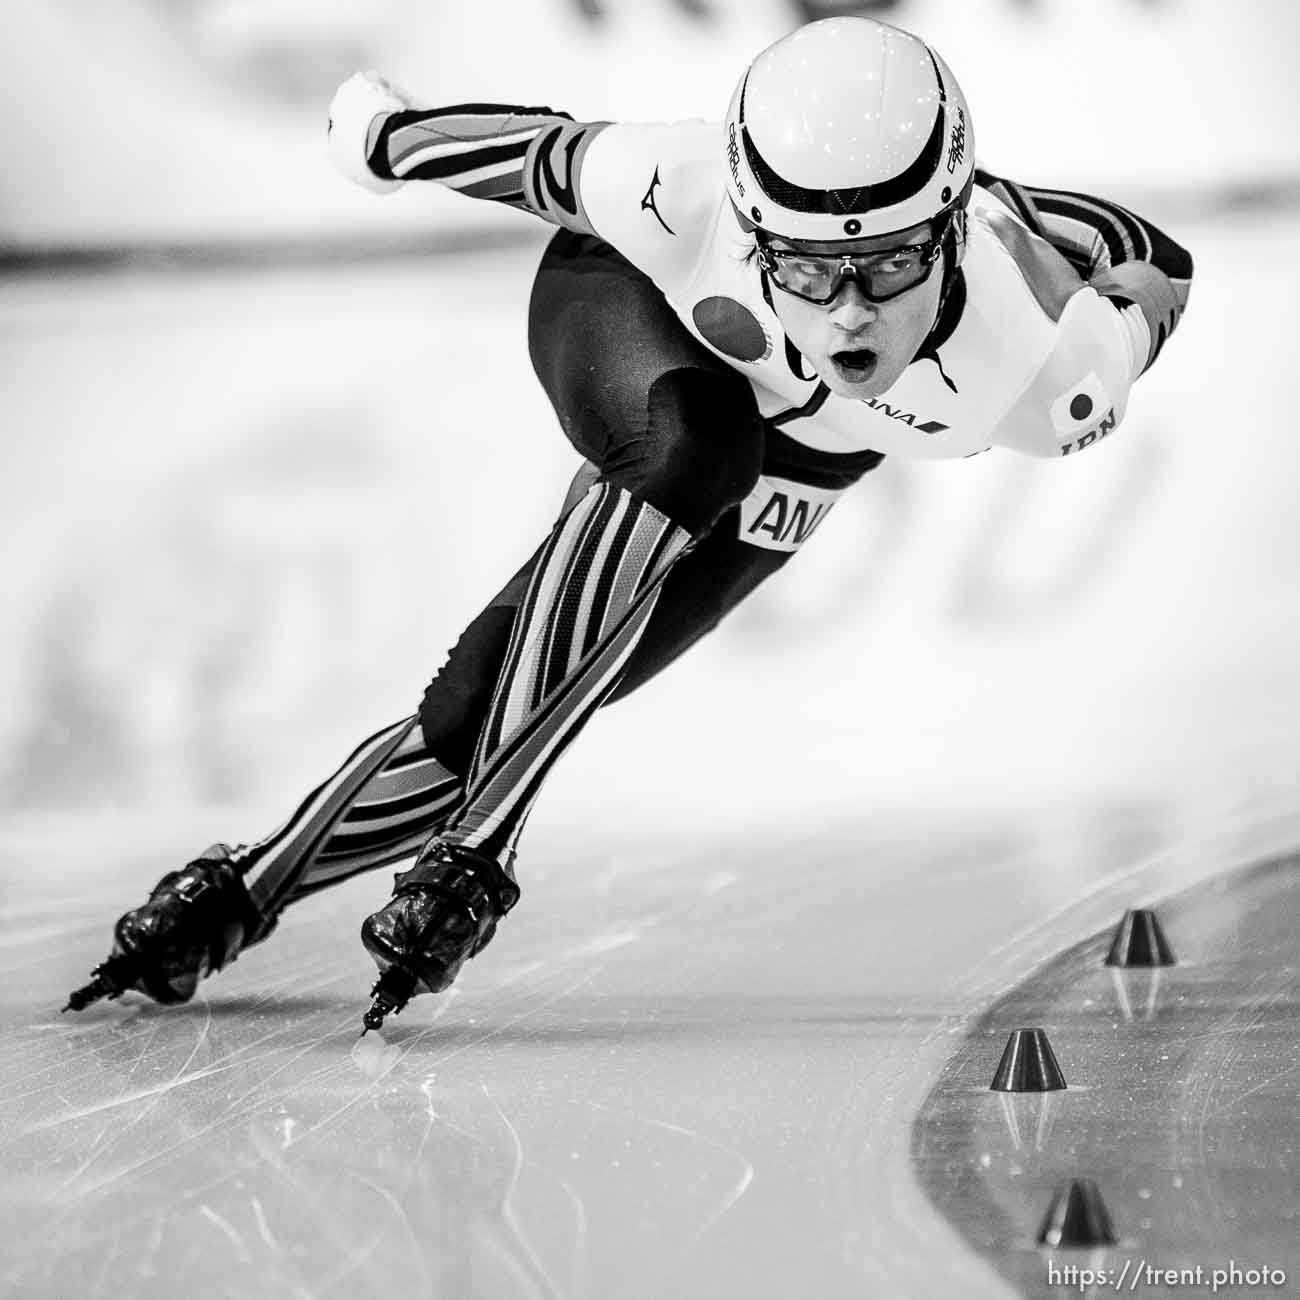 (Trent Nelson  |  The Salt Lake Tribune) Yamato Matsui (Japan) competes in Men Team Sprint at the ISU World Single Distances Speed Skating Championships at the Utah Olympic Oval in Kearns on Thursday, Feb. 13, 2020.